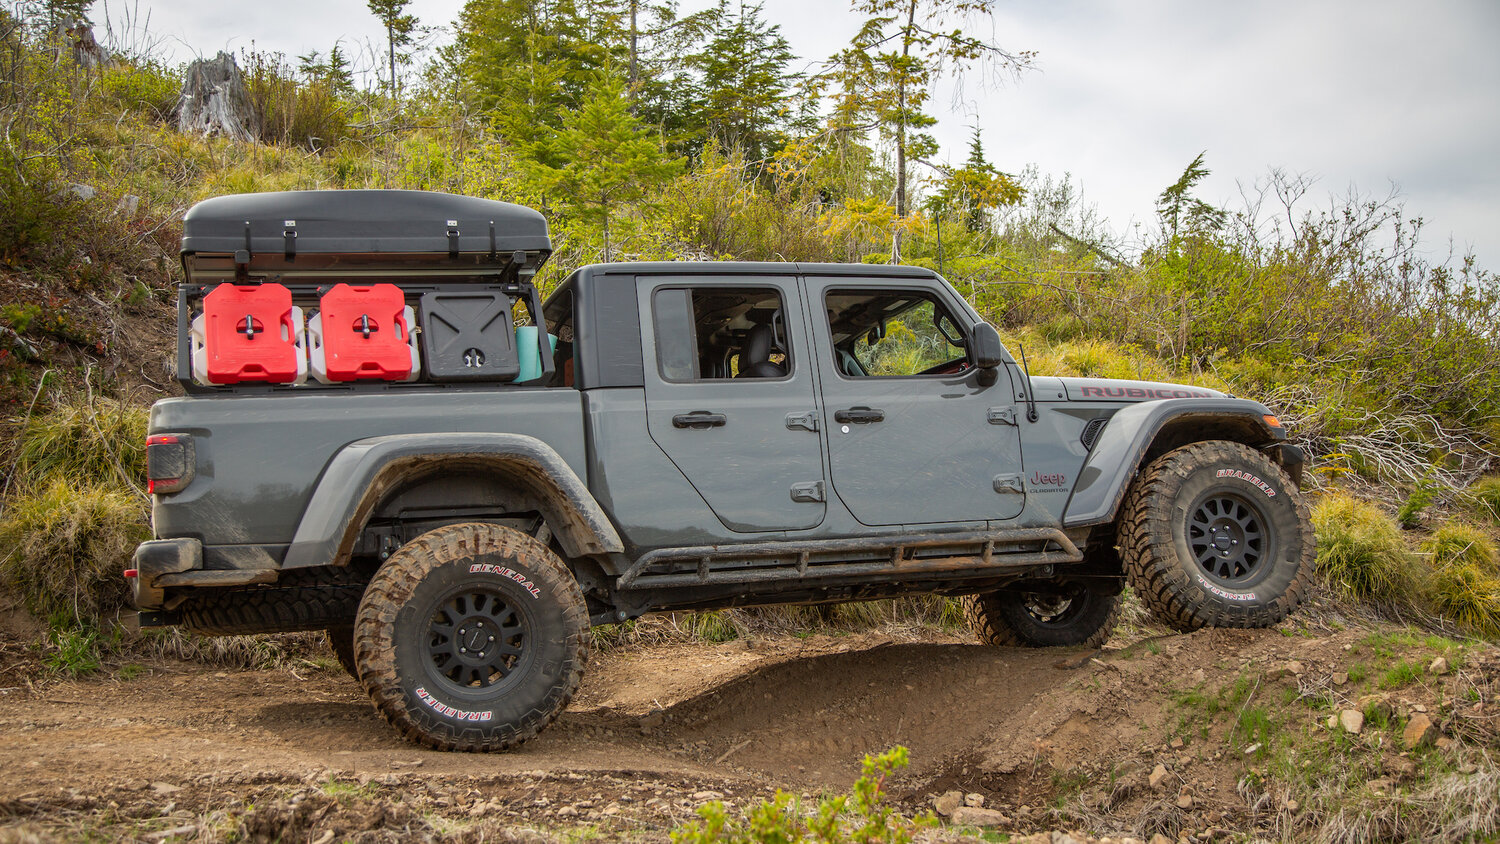 Essential Overlanding Gear for Your Next Off-Road Adventure